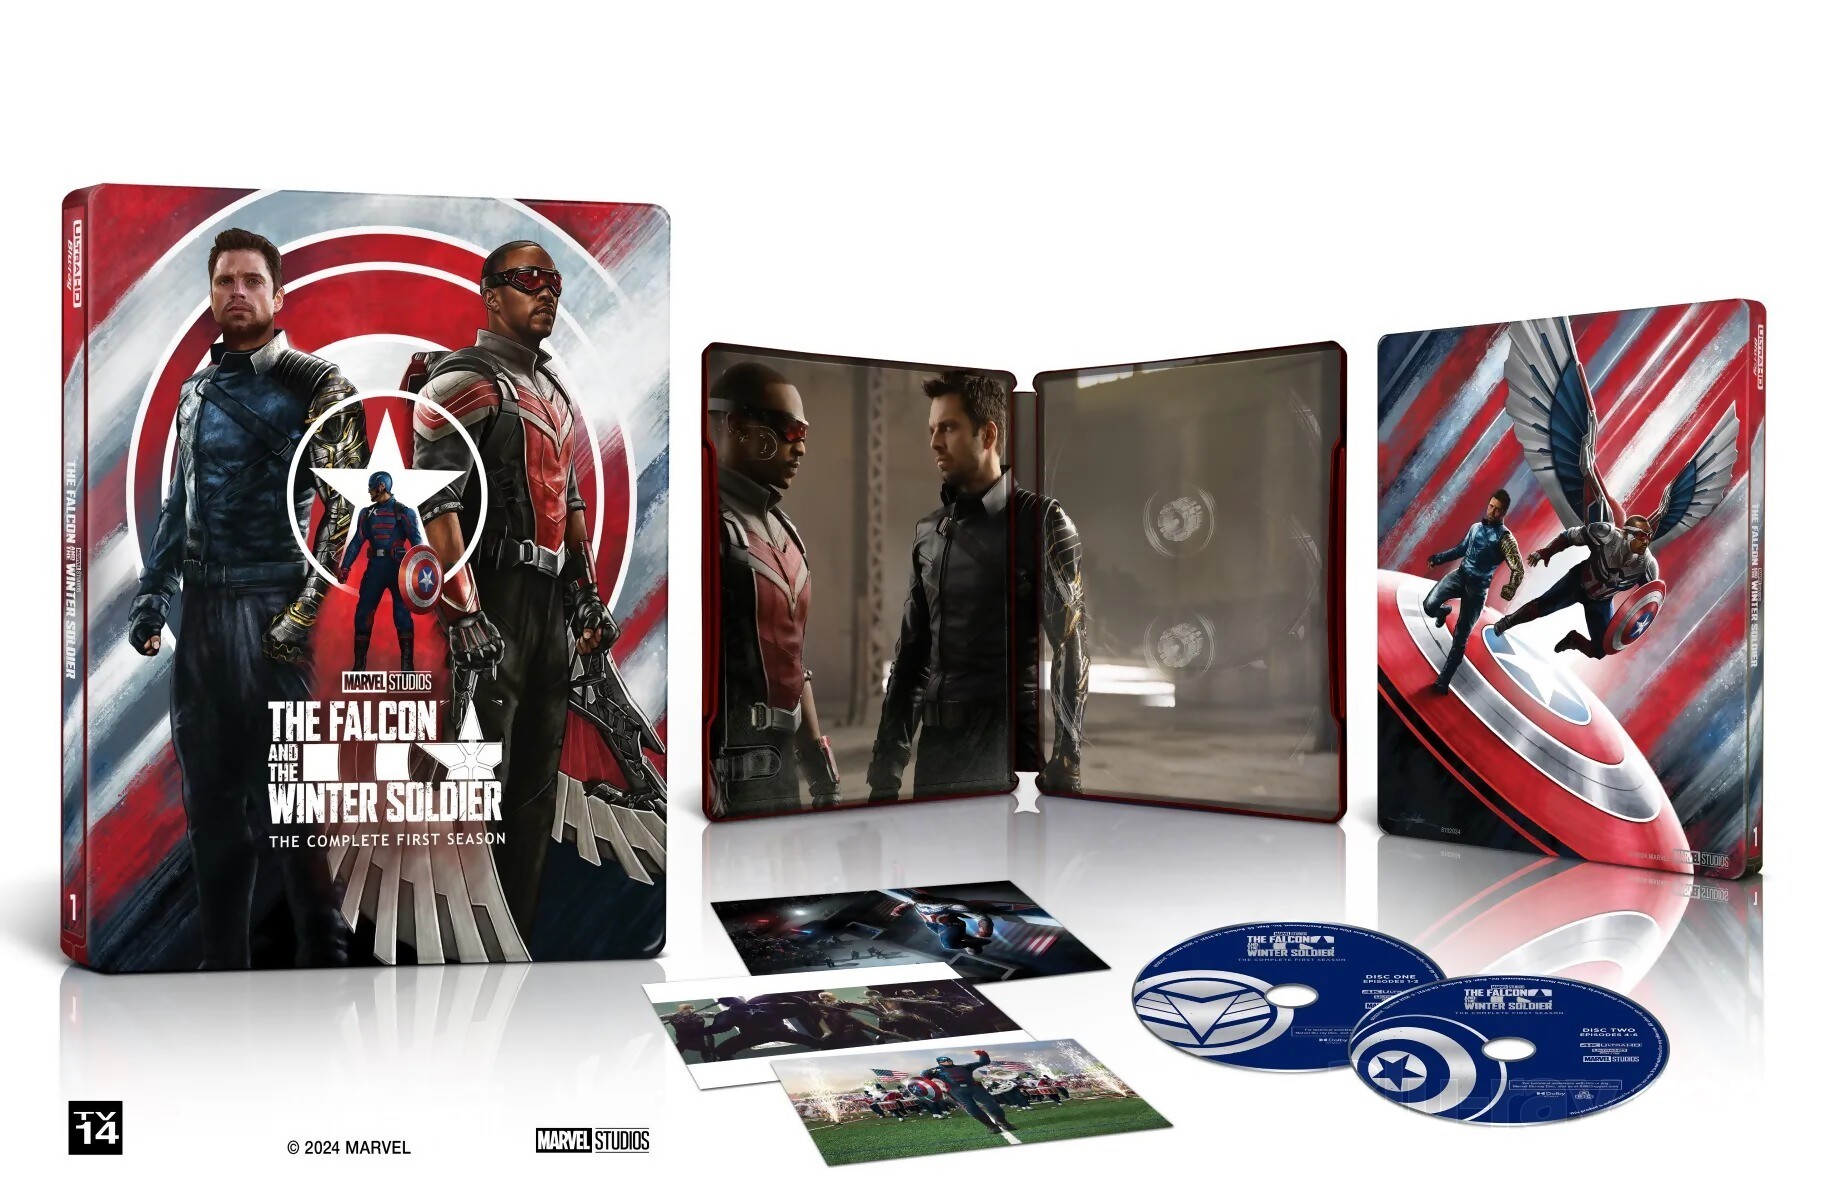 The Falcon and the Winter Soldier: The Complete First Season 4k Blu-ray SteelBook